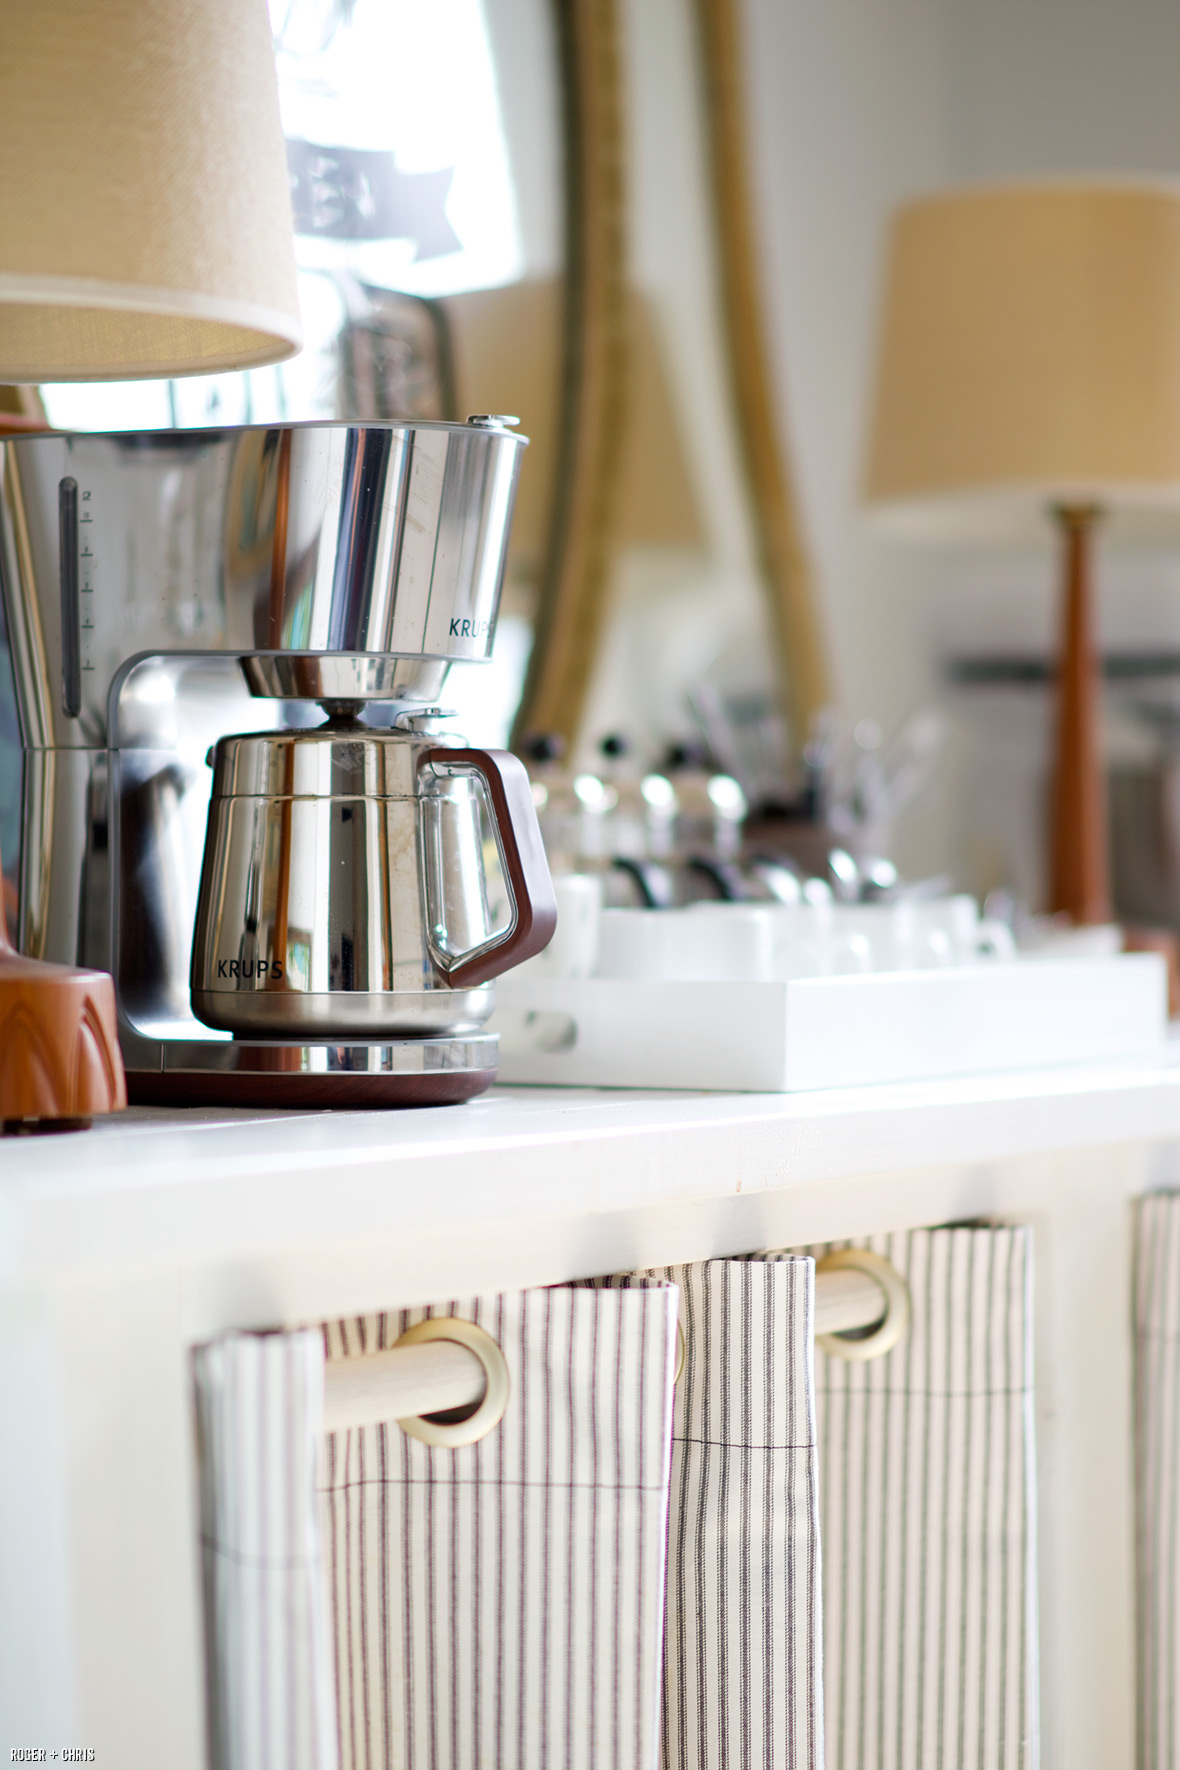 The coffee maker and cups sit atop the pantry table.